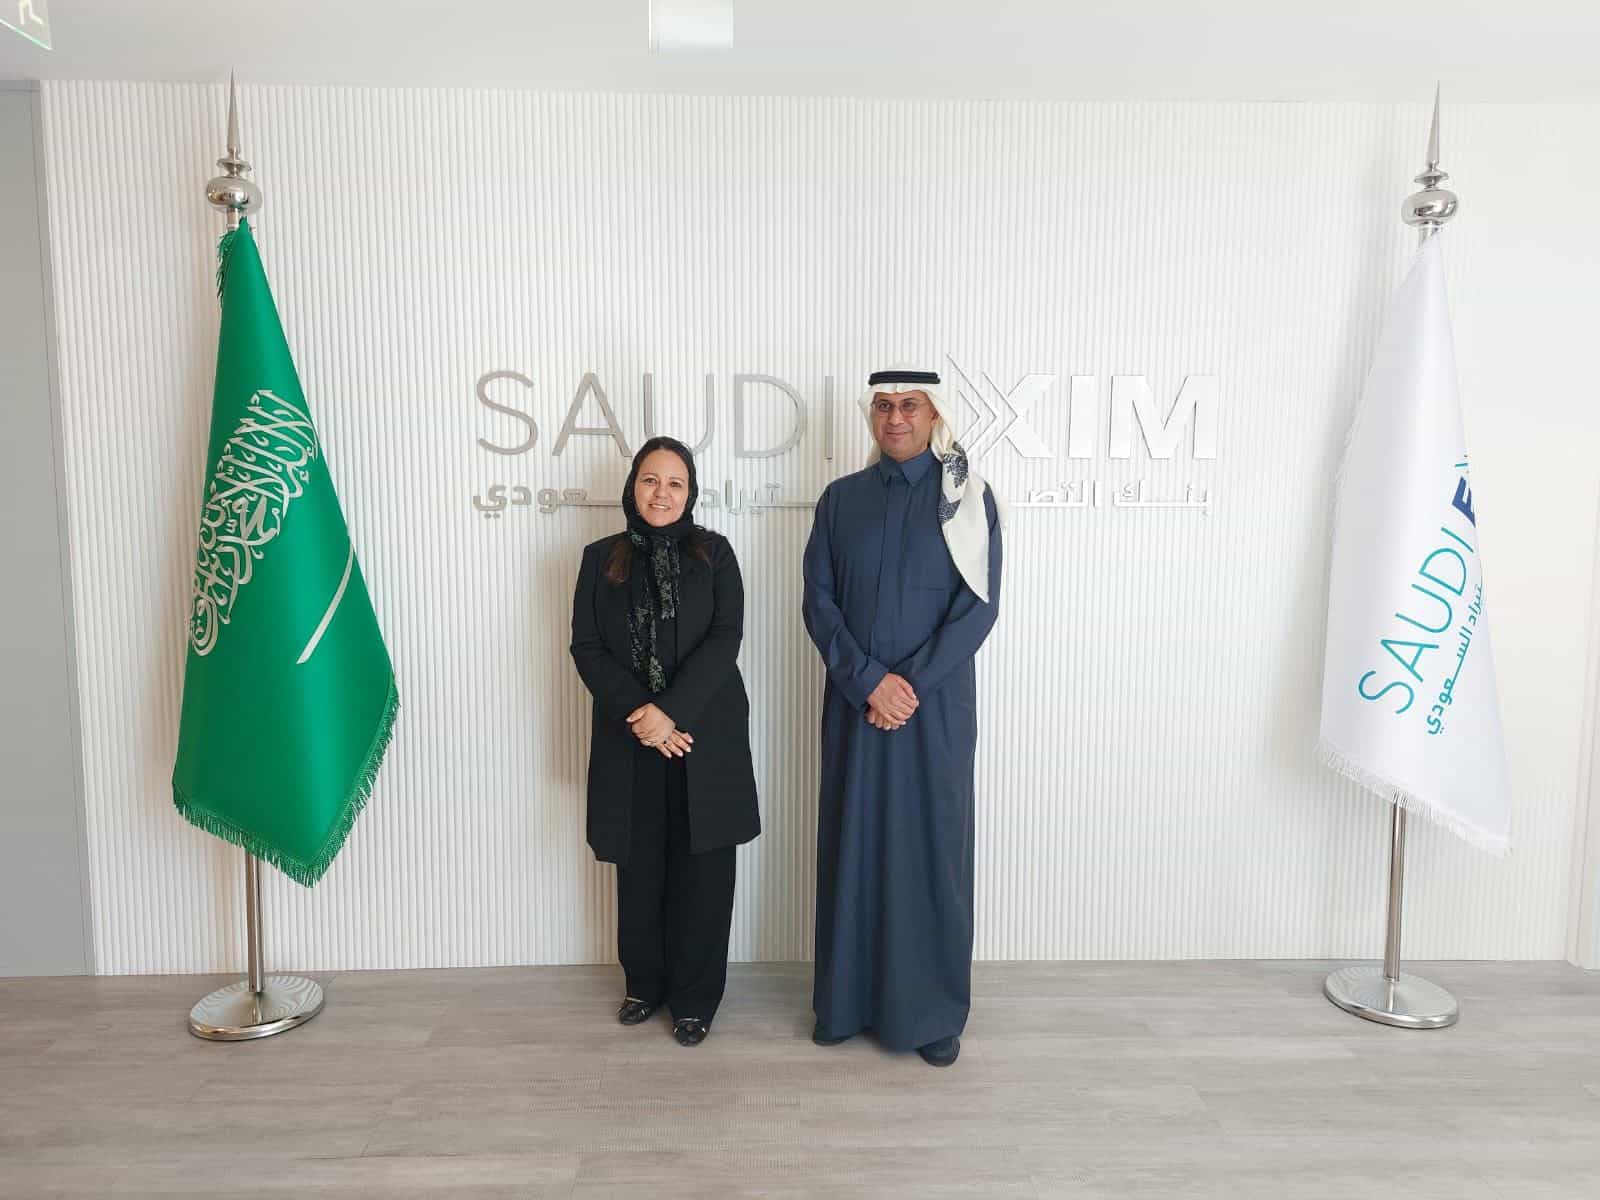 A courtesy visit of Mrs Latifa Elbouabdellaoui, ICDT’s Director General to the CEO of Saudi Eximbank